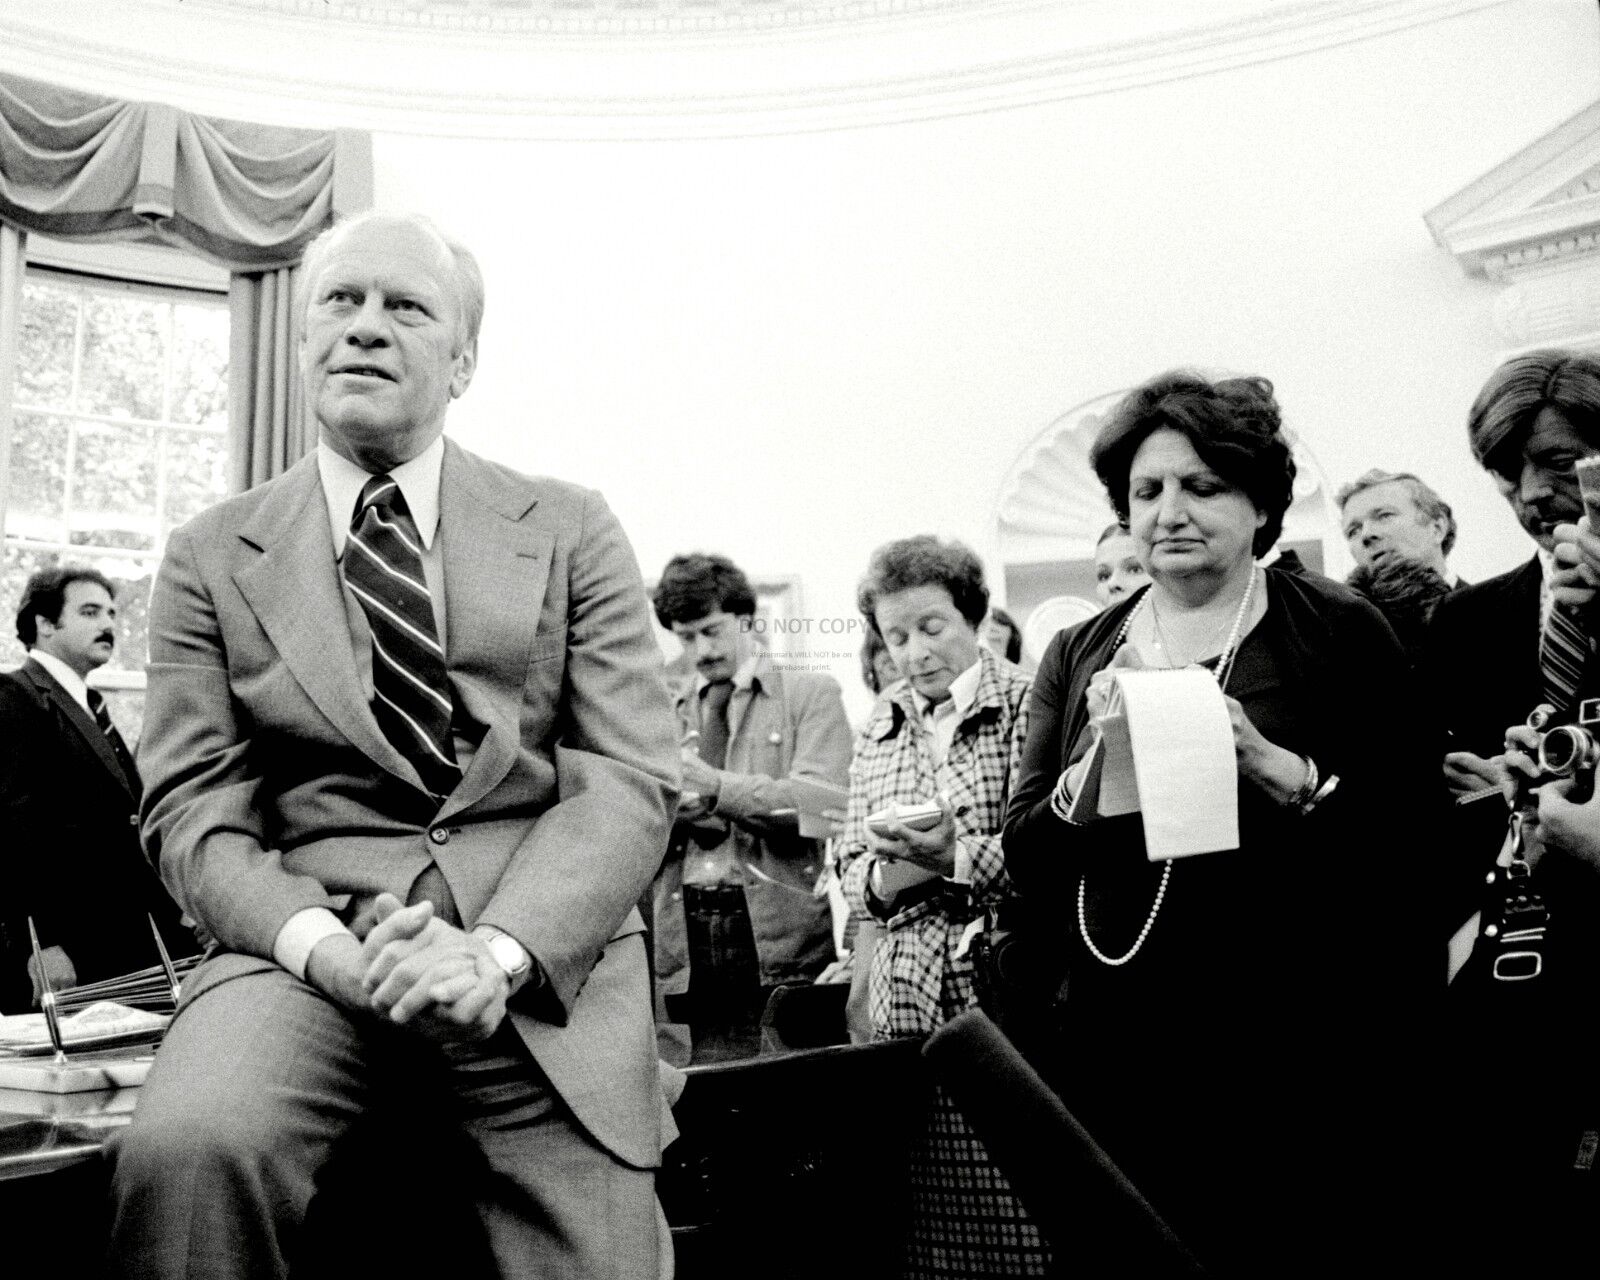 PRESIDENT GERALD R. FORD SPEAKS WITH HELEN THOMAS AND OTHERS 8X10 PHOTO (BB-145)